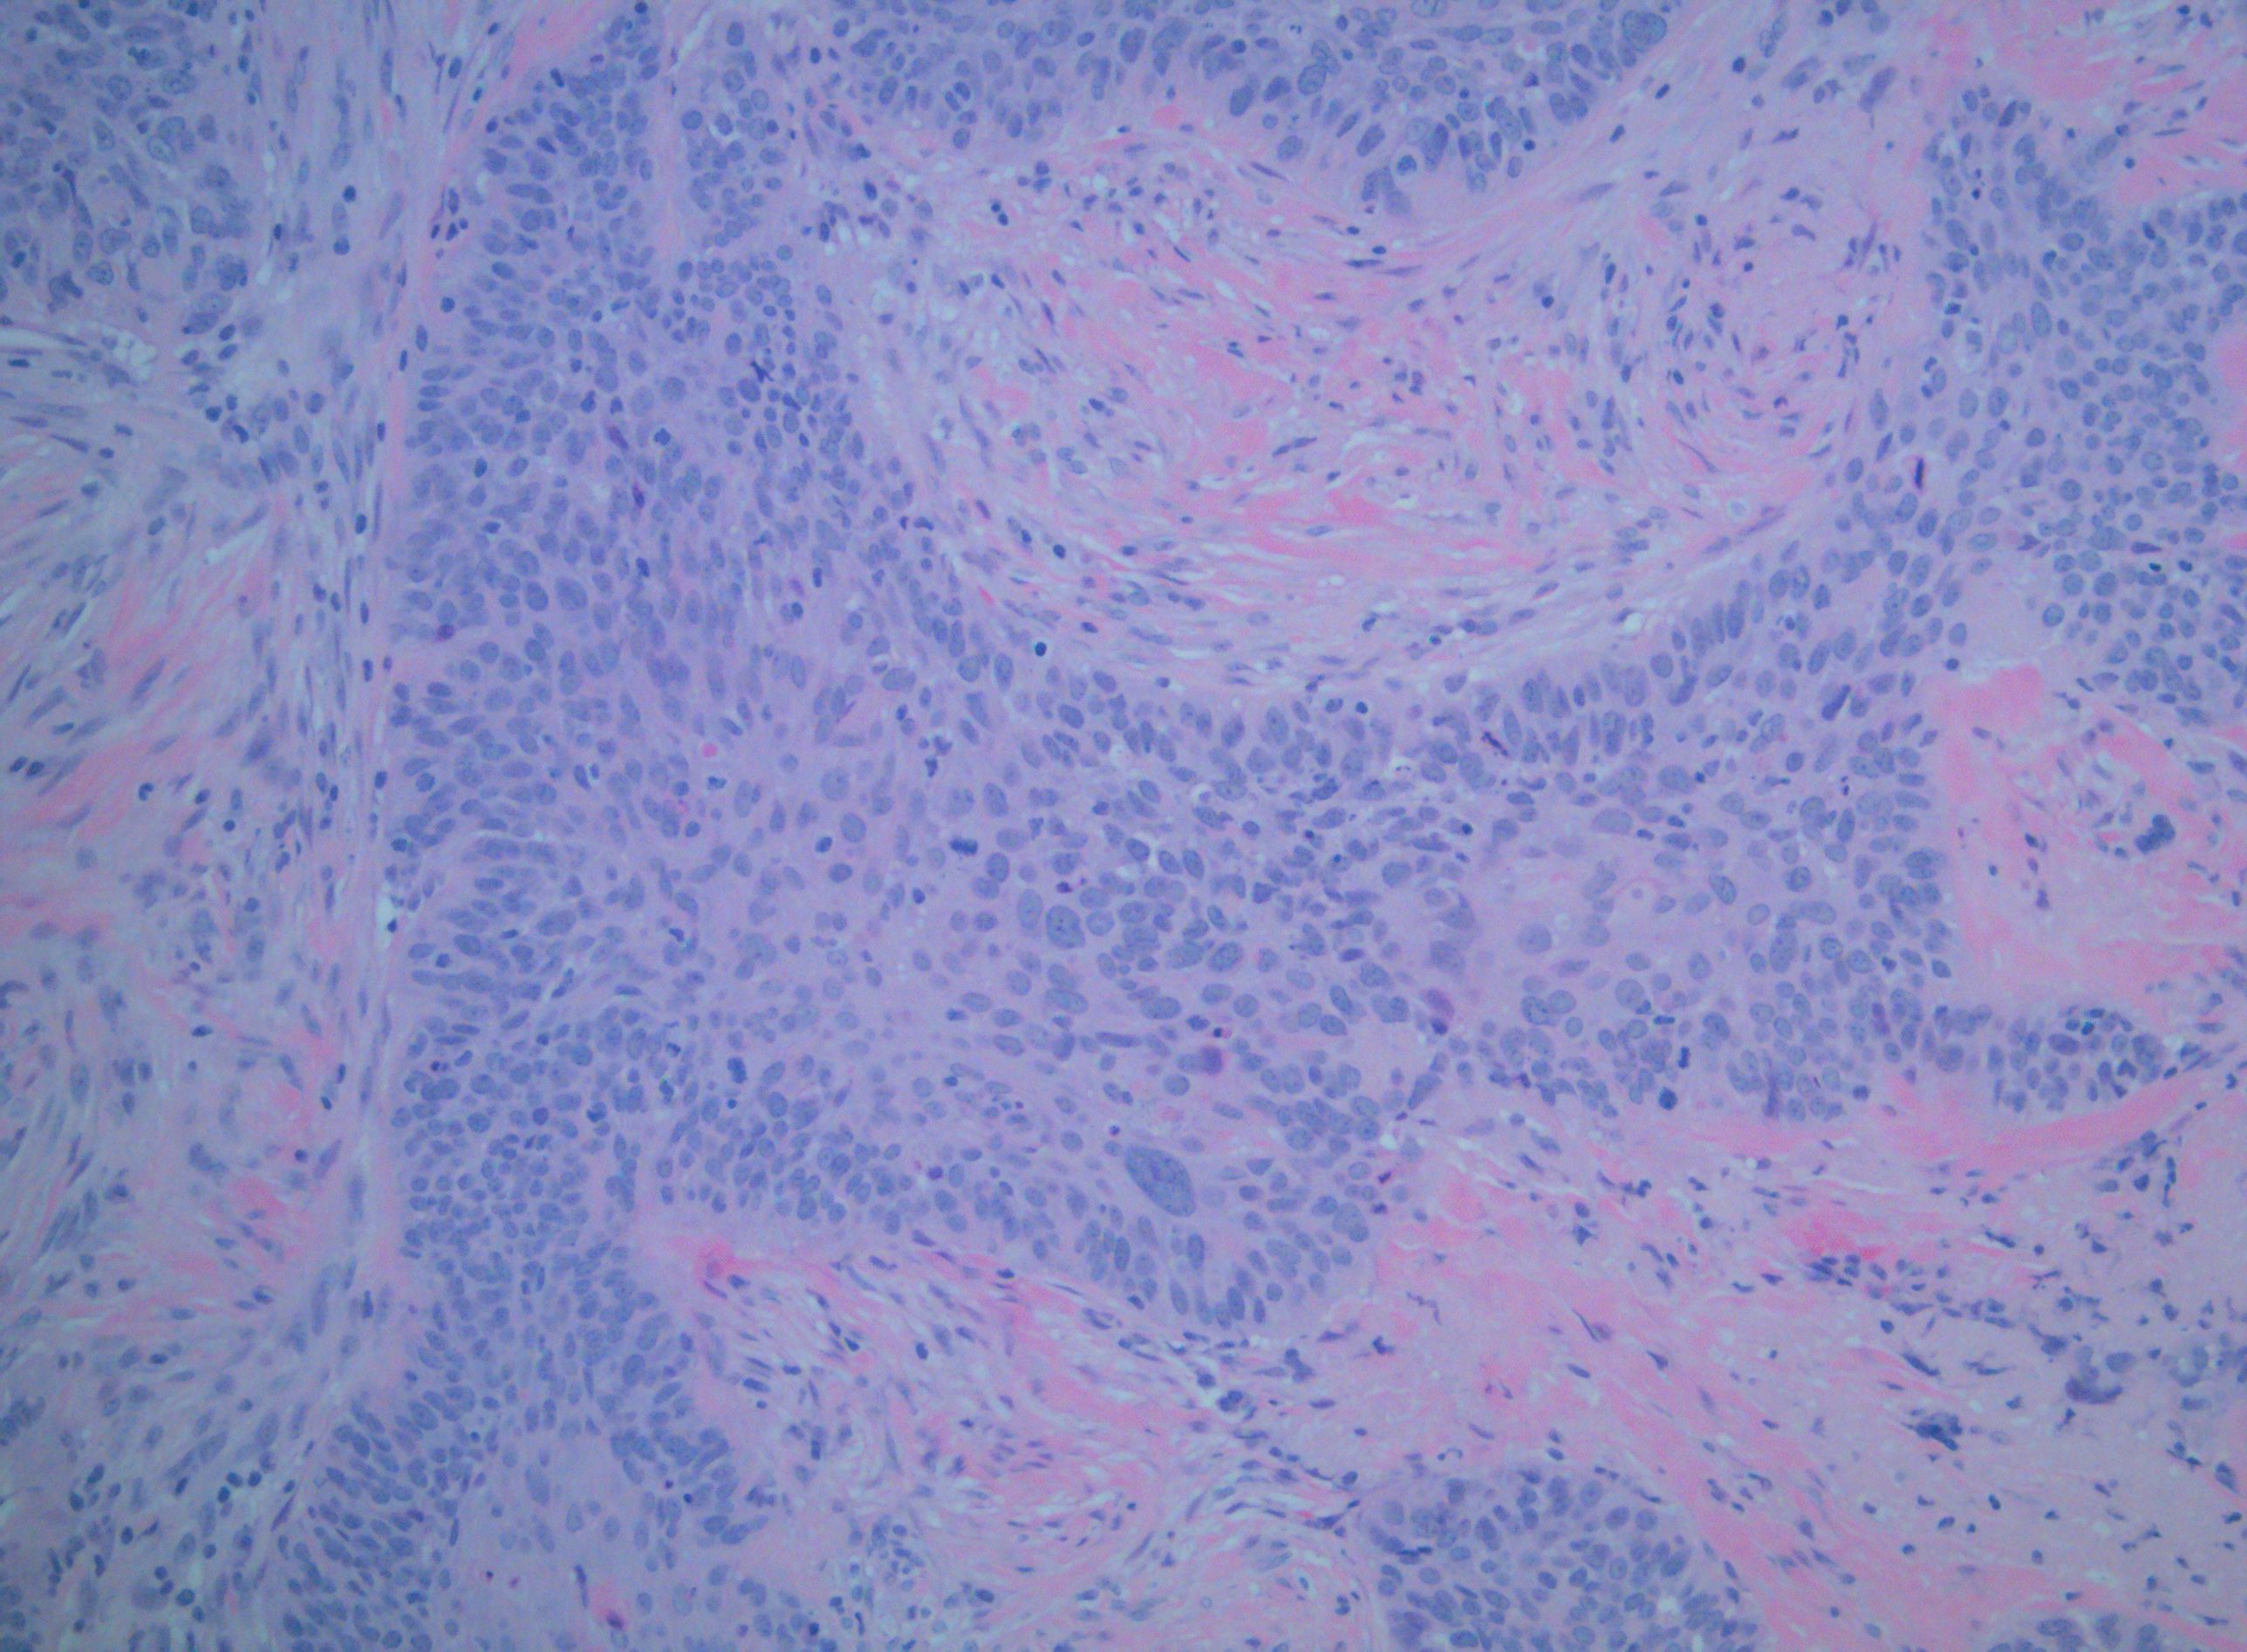 Squamous Cell Carcinoma (SCC) of the palate without P16 staining